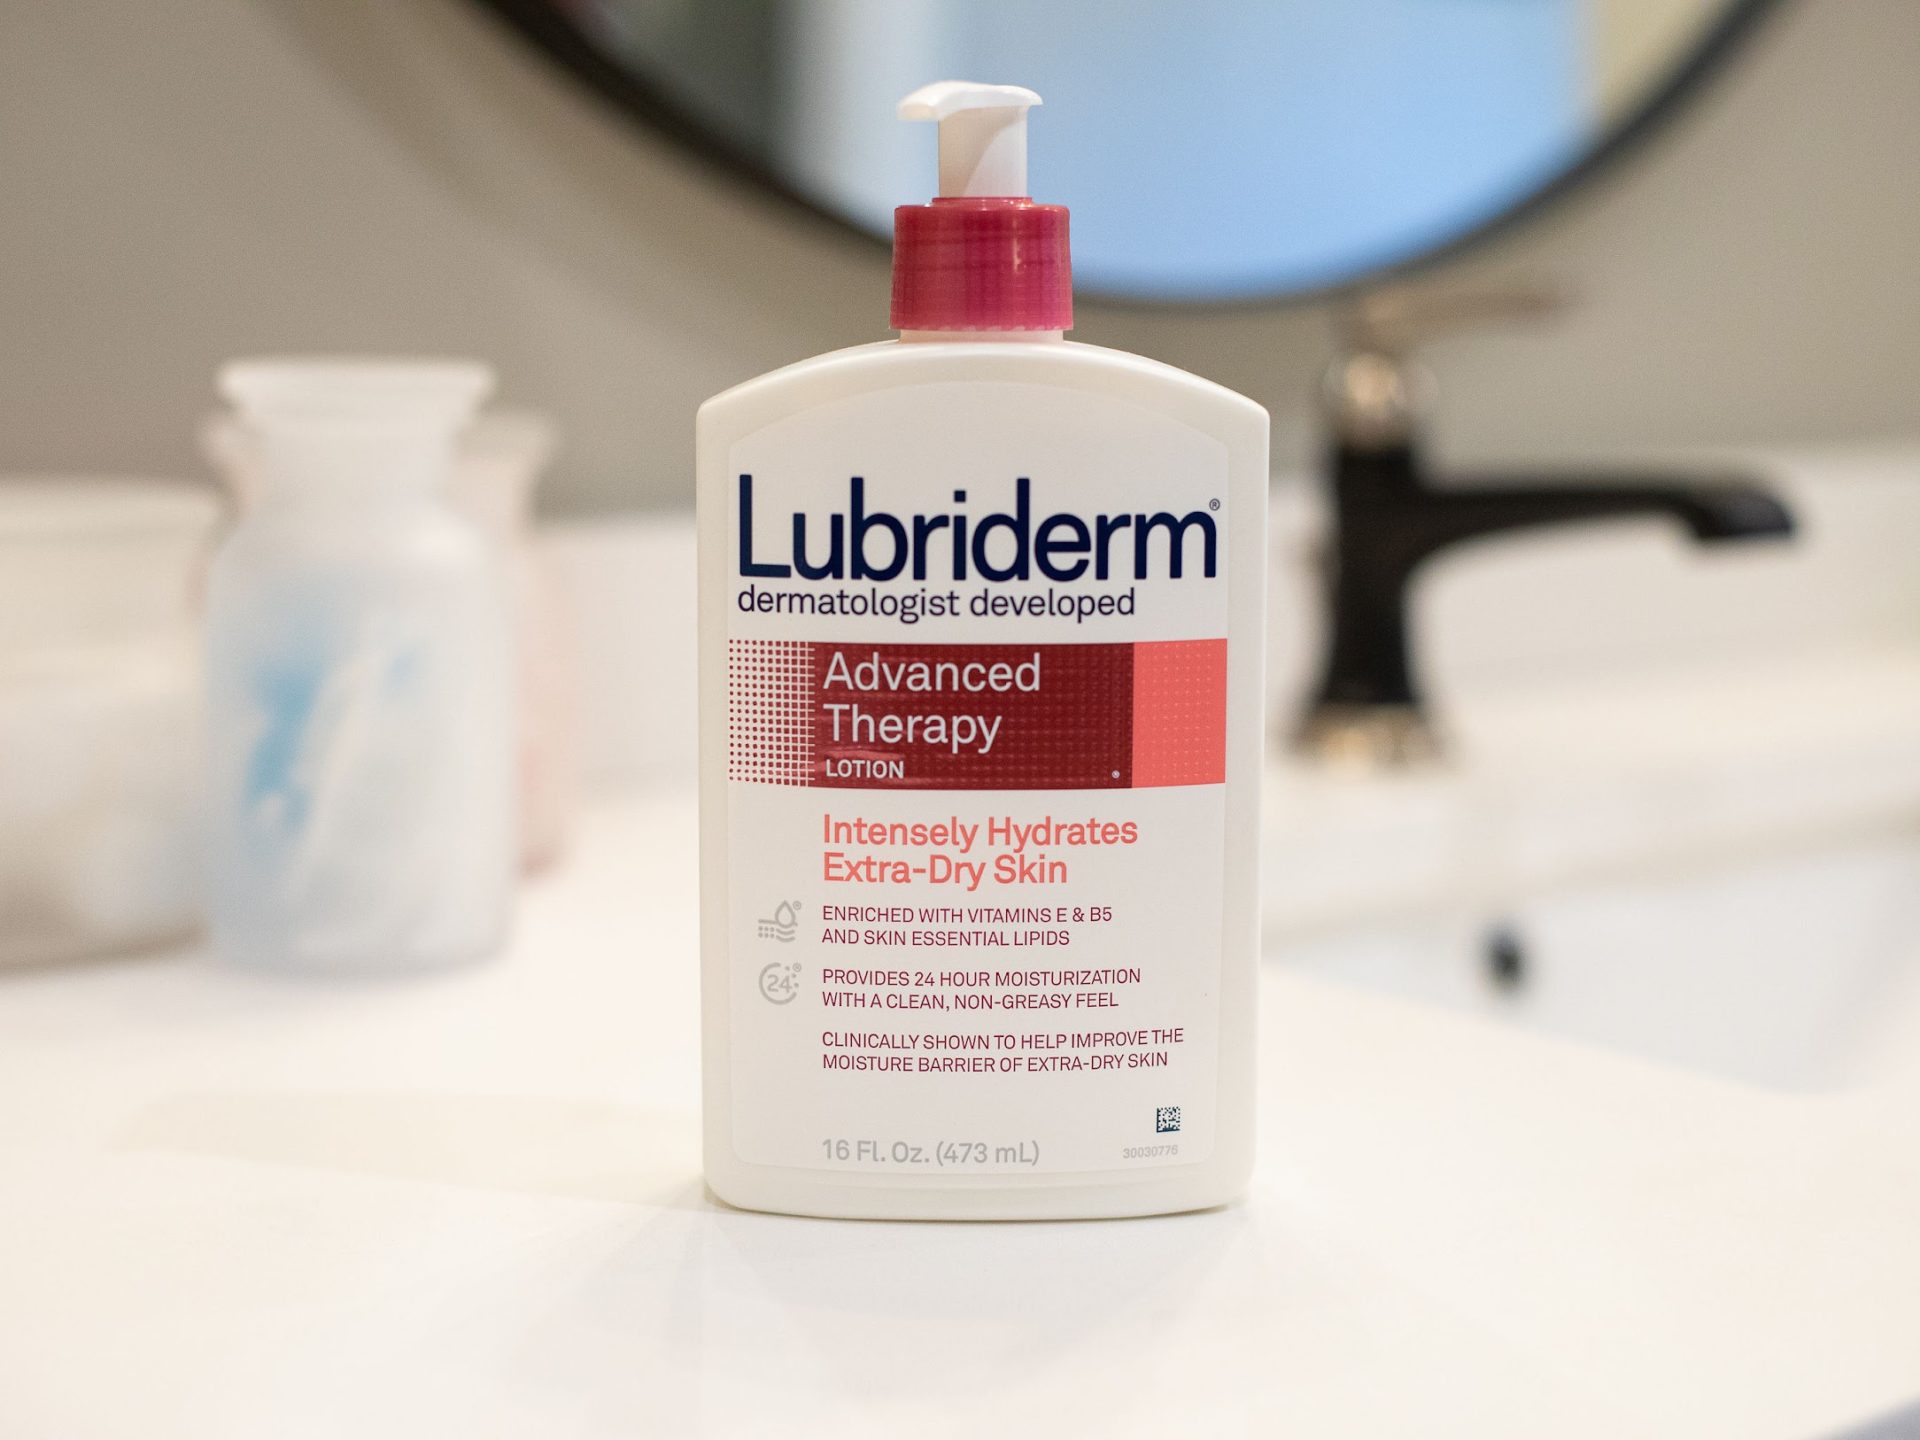 Lubriderm Lotion As Low As $1.99 At Kroger (Regular Price $9.99)